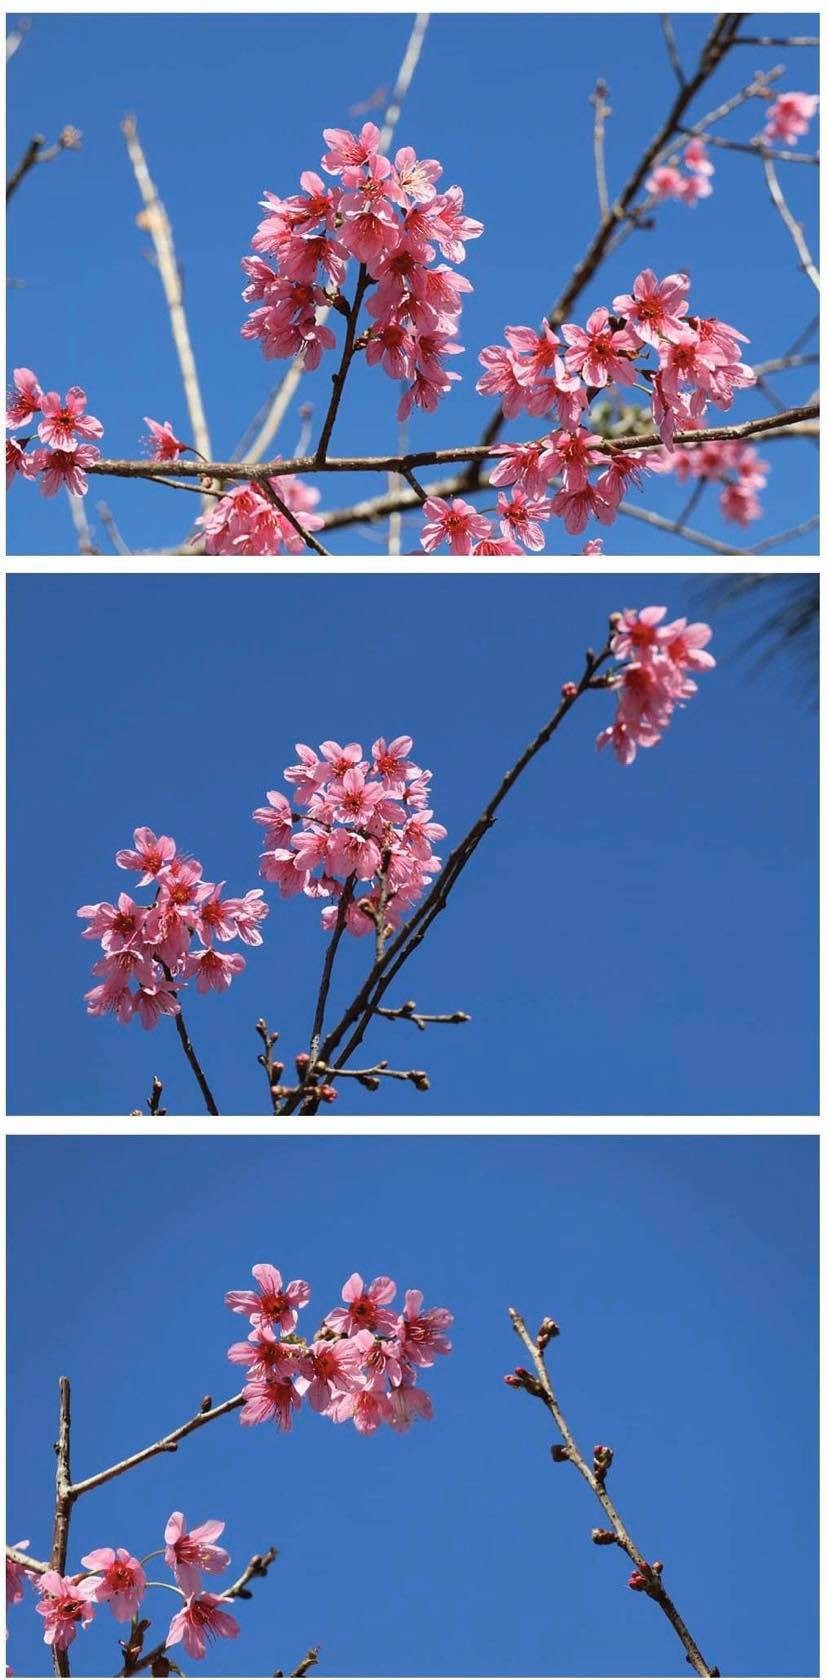 Da Lat turns a ravishing shade of pink with cherry blossoms in full bloom ảnh 3